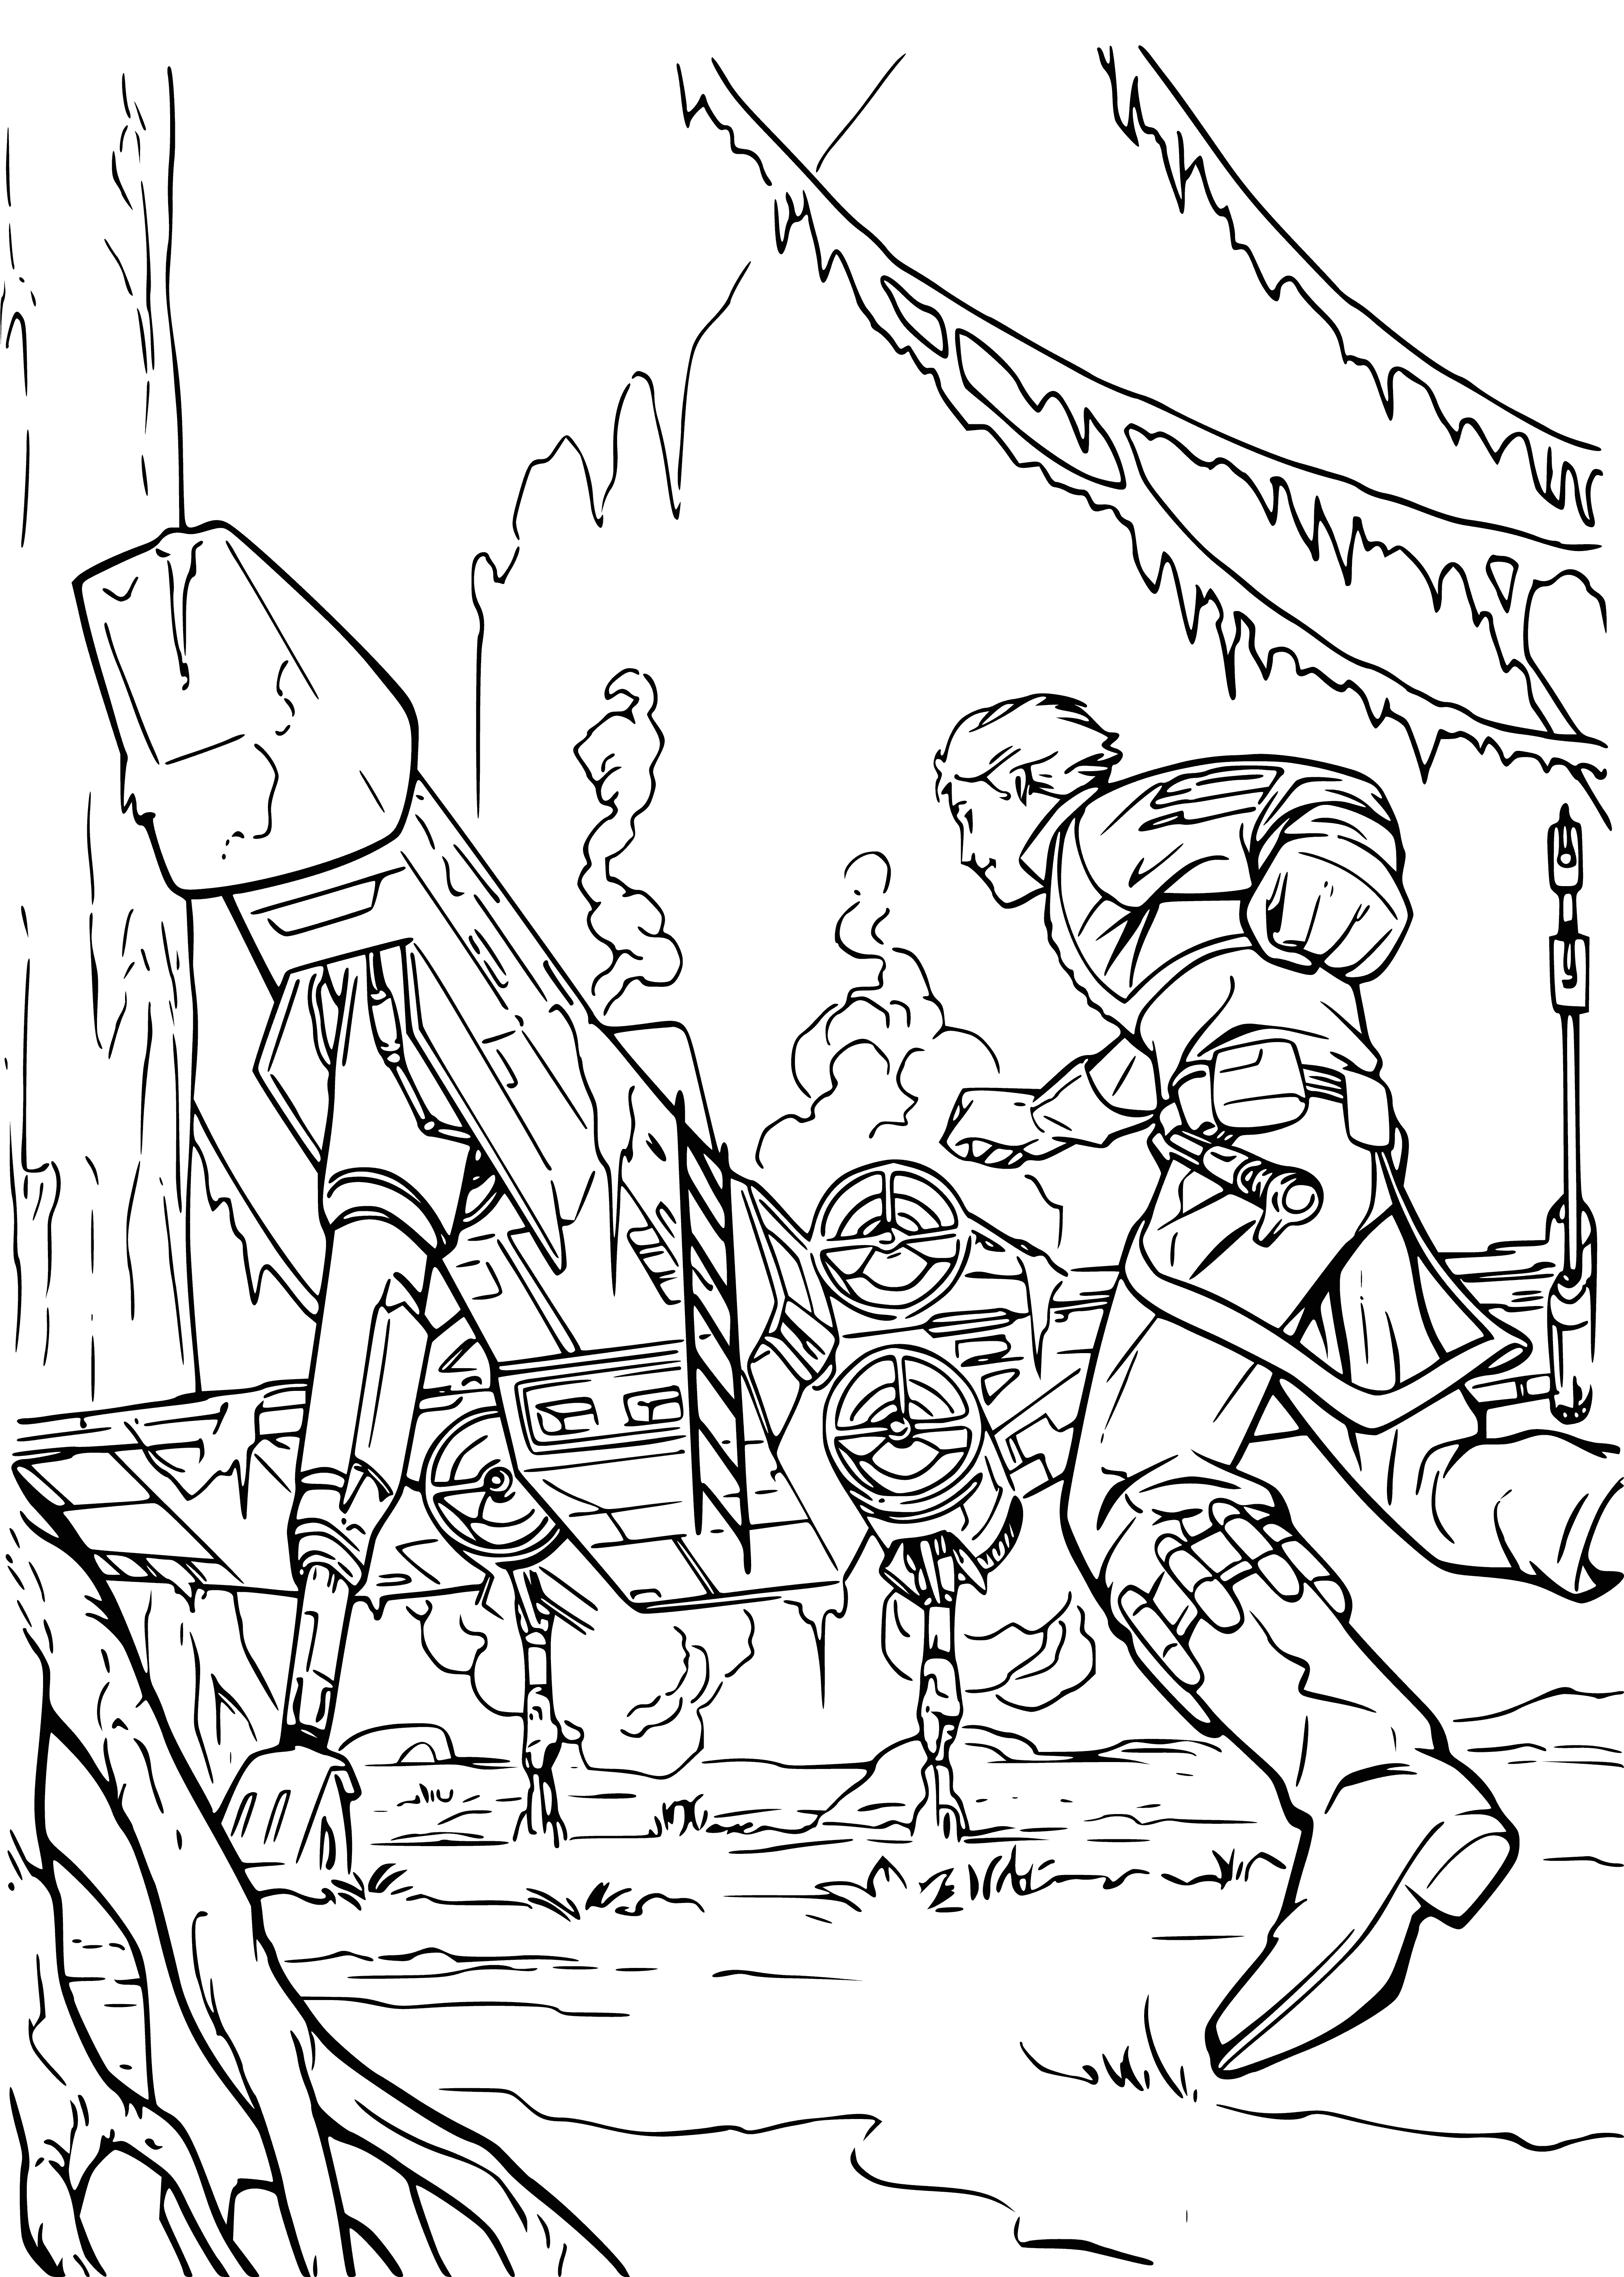 coloring page: Luke Skywalker runs to a spaceship wearing light-colored clothes, his hair blowing in the wind.